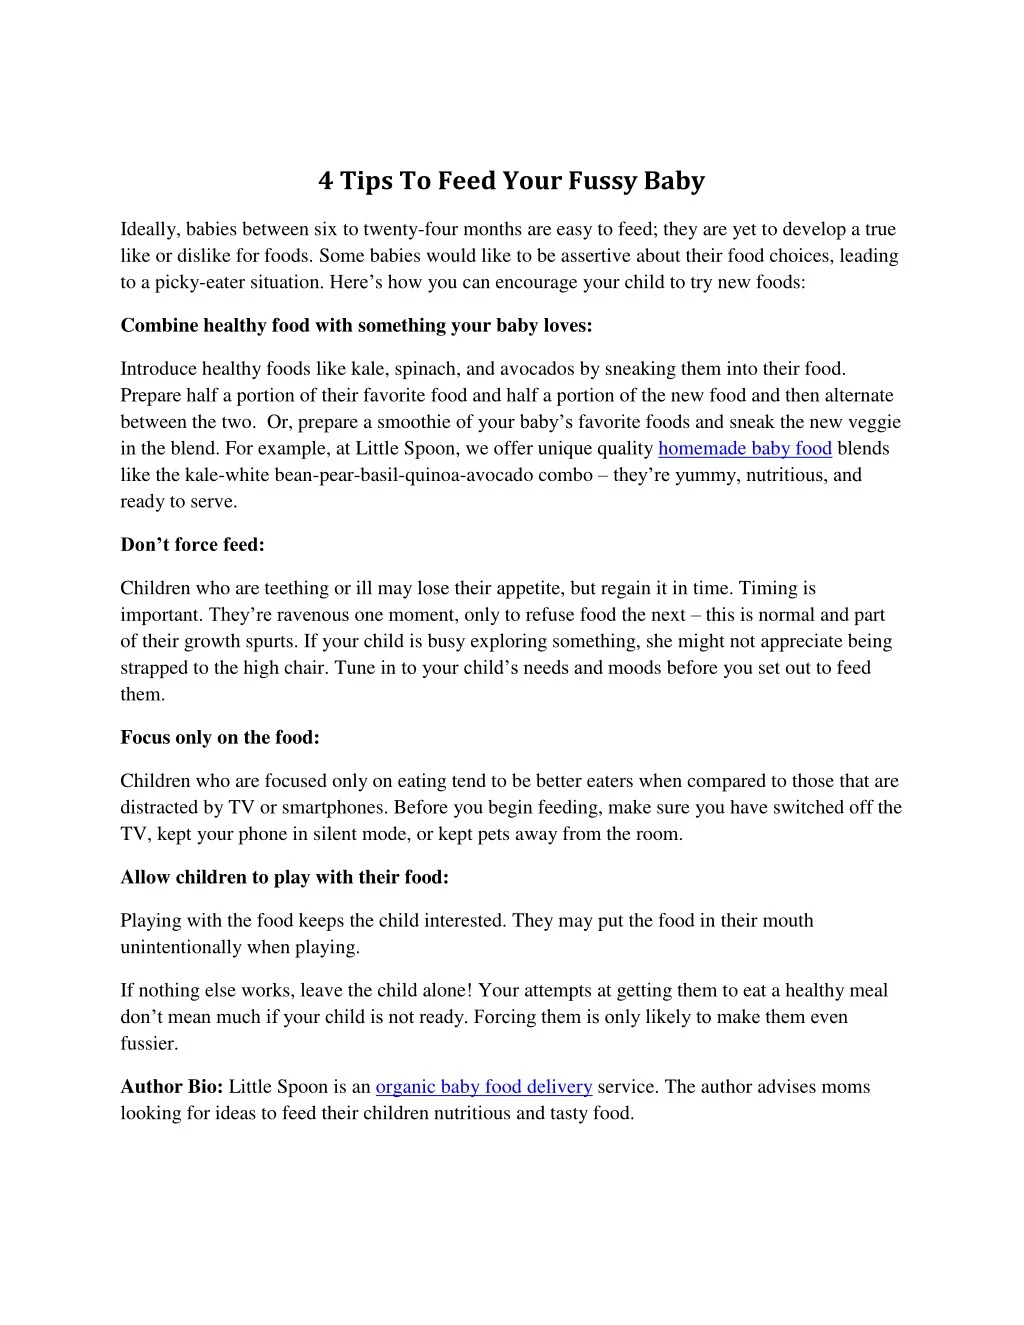 4 tips to feed your fussy baby